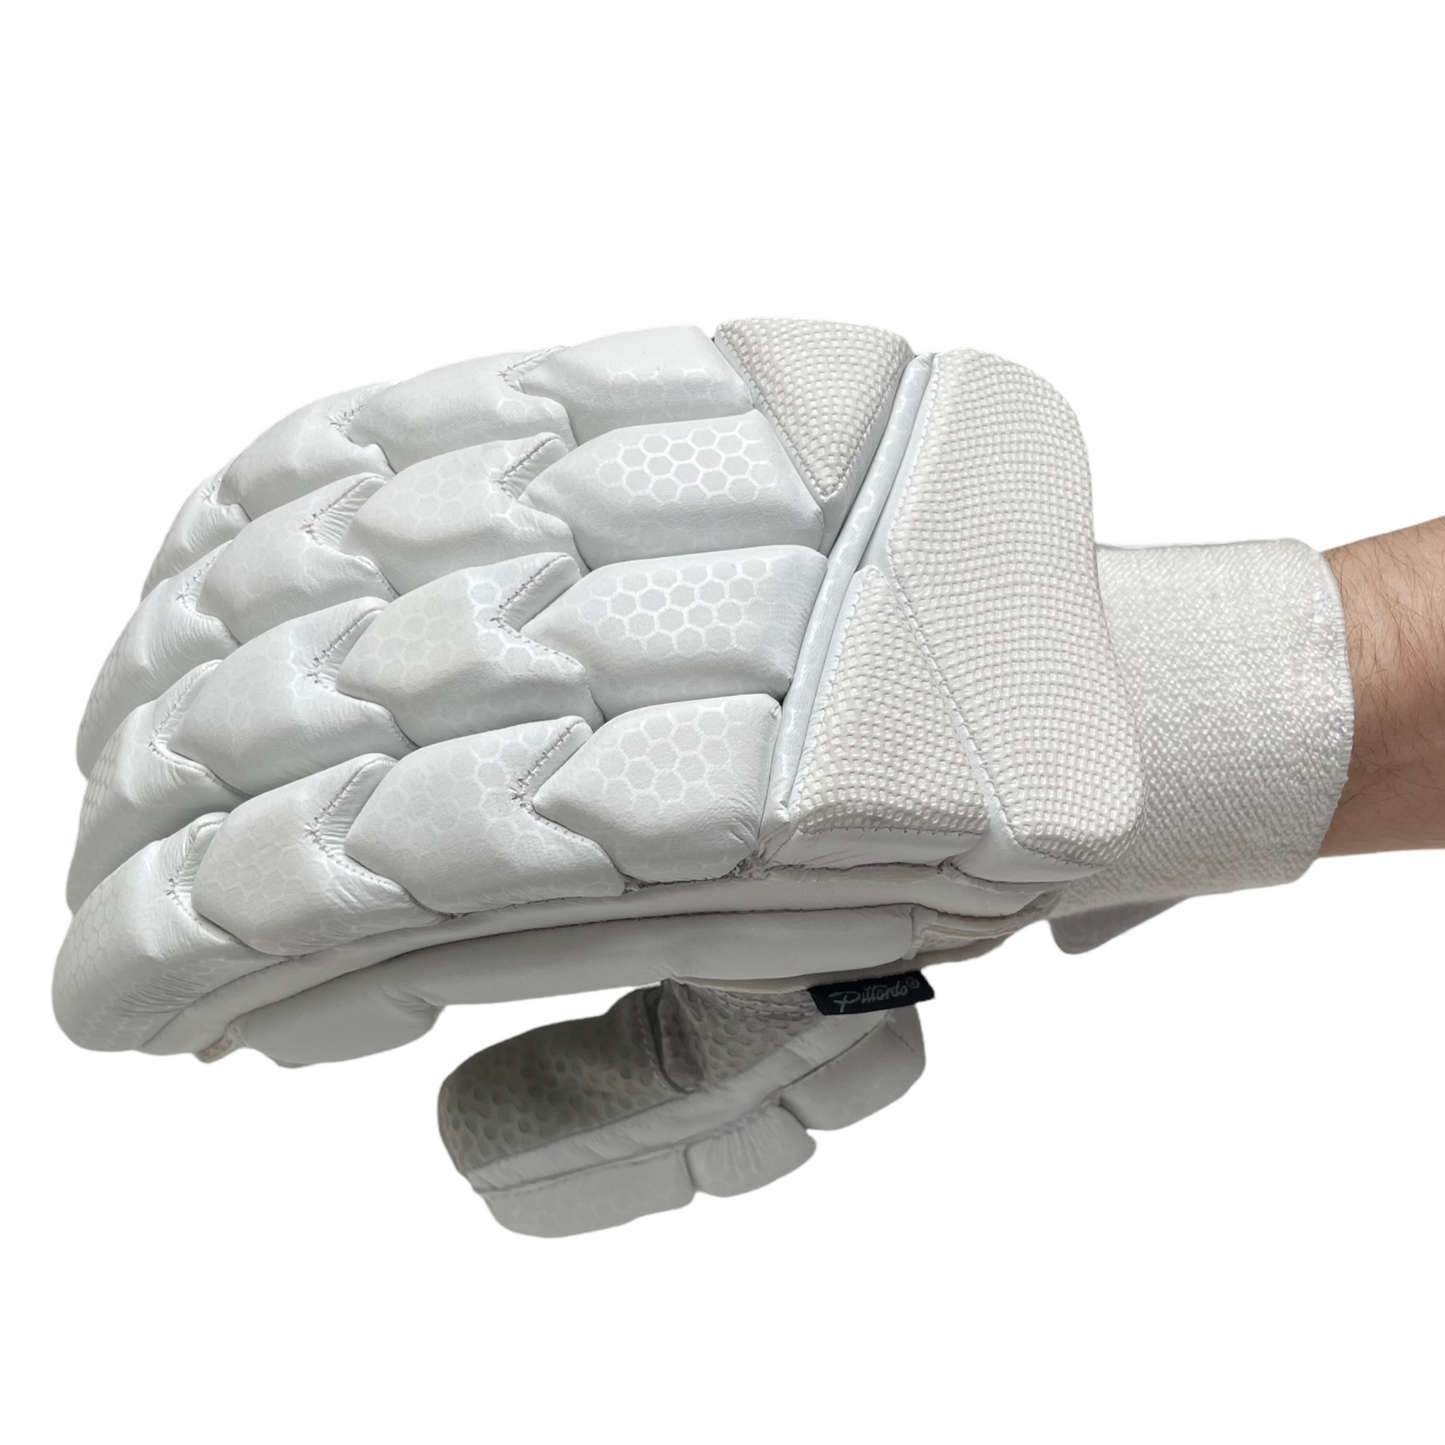 Premium cricket batting glove. Lightweight professional protection.  Comfortable, Pittard leather, Carbon Design. Minimalist look. Towelling wrist strap. RH & LH. Custom Cricket 201. Cricket shop store Brighton & Hove East Sussex.  Appointment only.  Next day delivery. Same day collection.